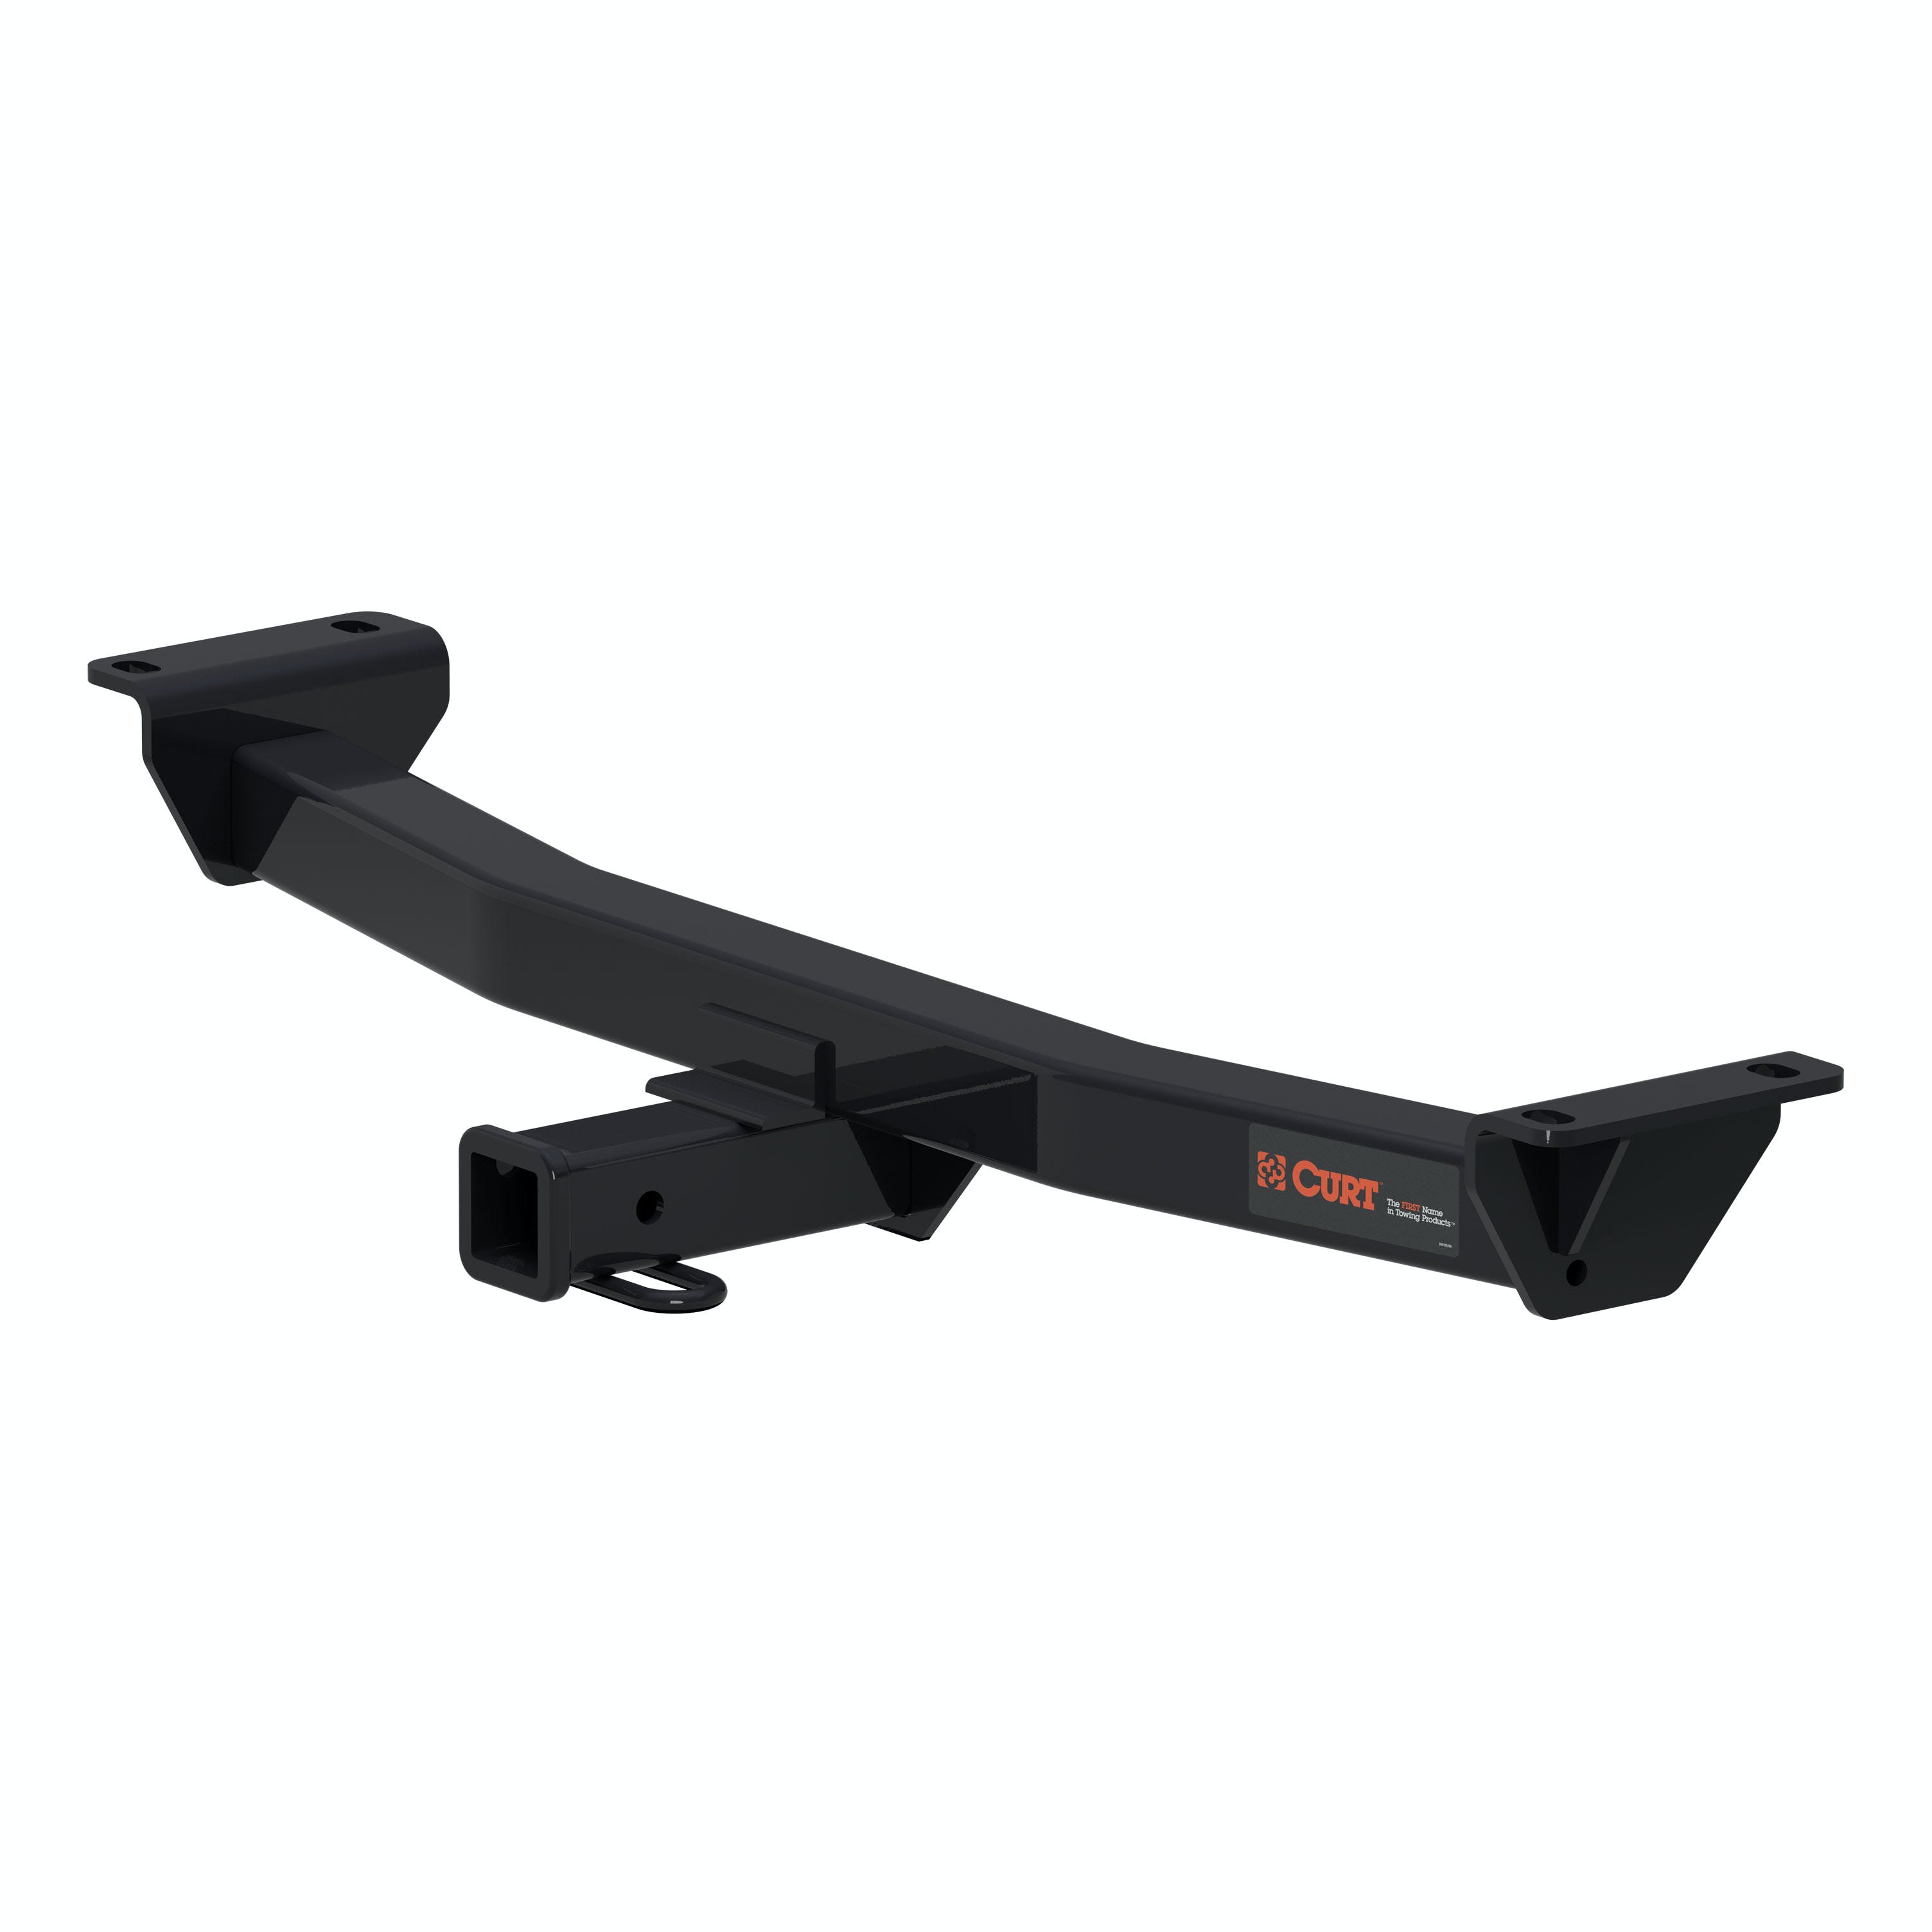 CURT 13417 Class 3 Trailer Hitch, 2 Receiver, Select Ford Ranger